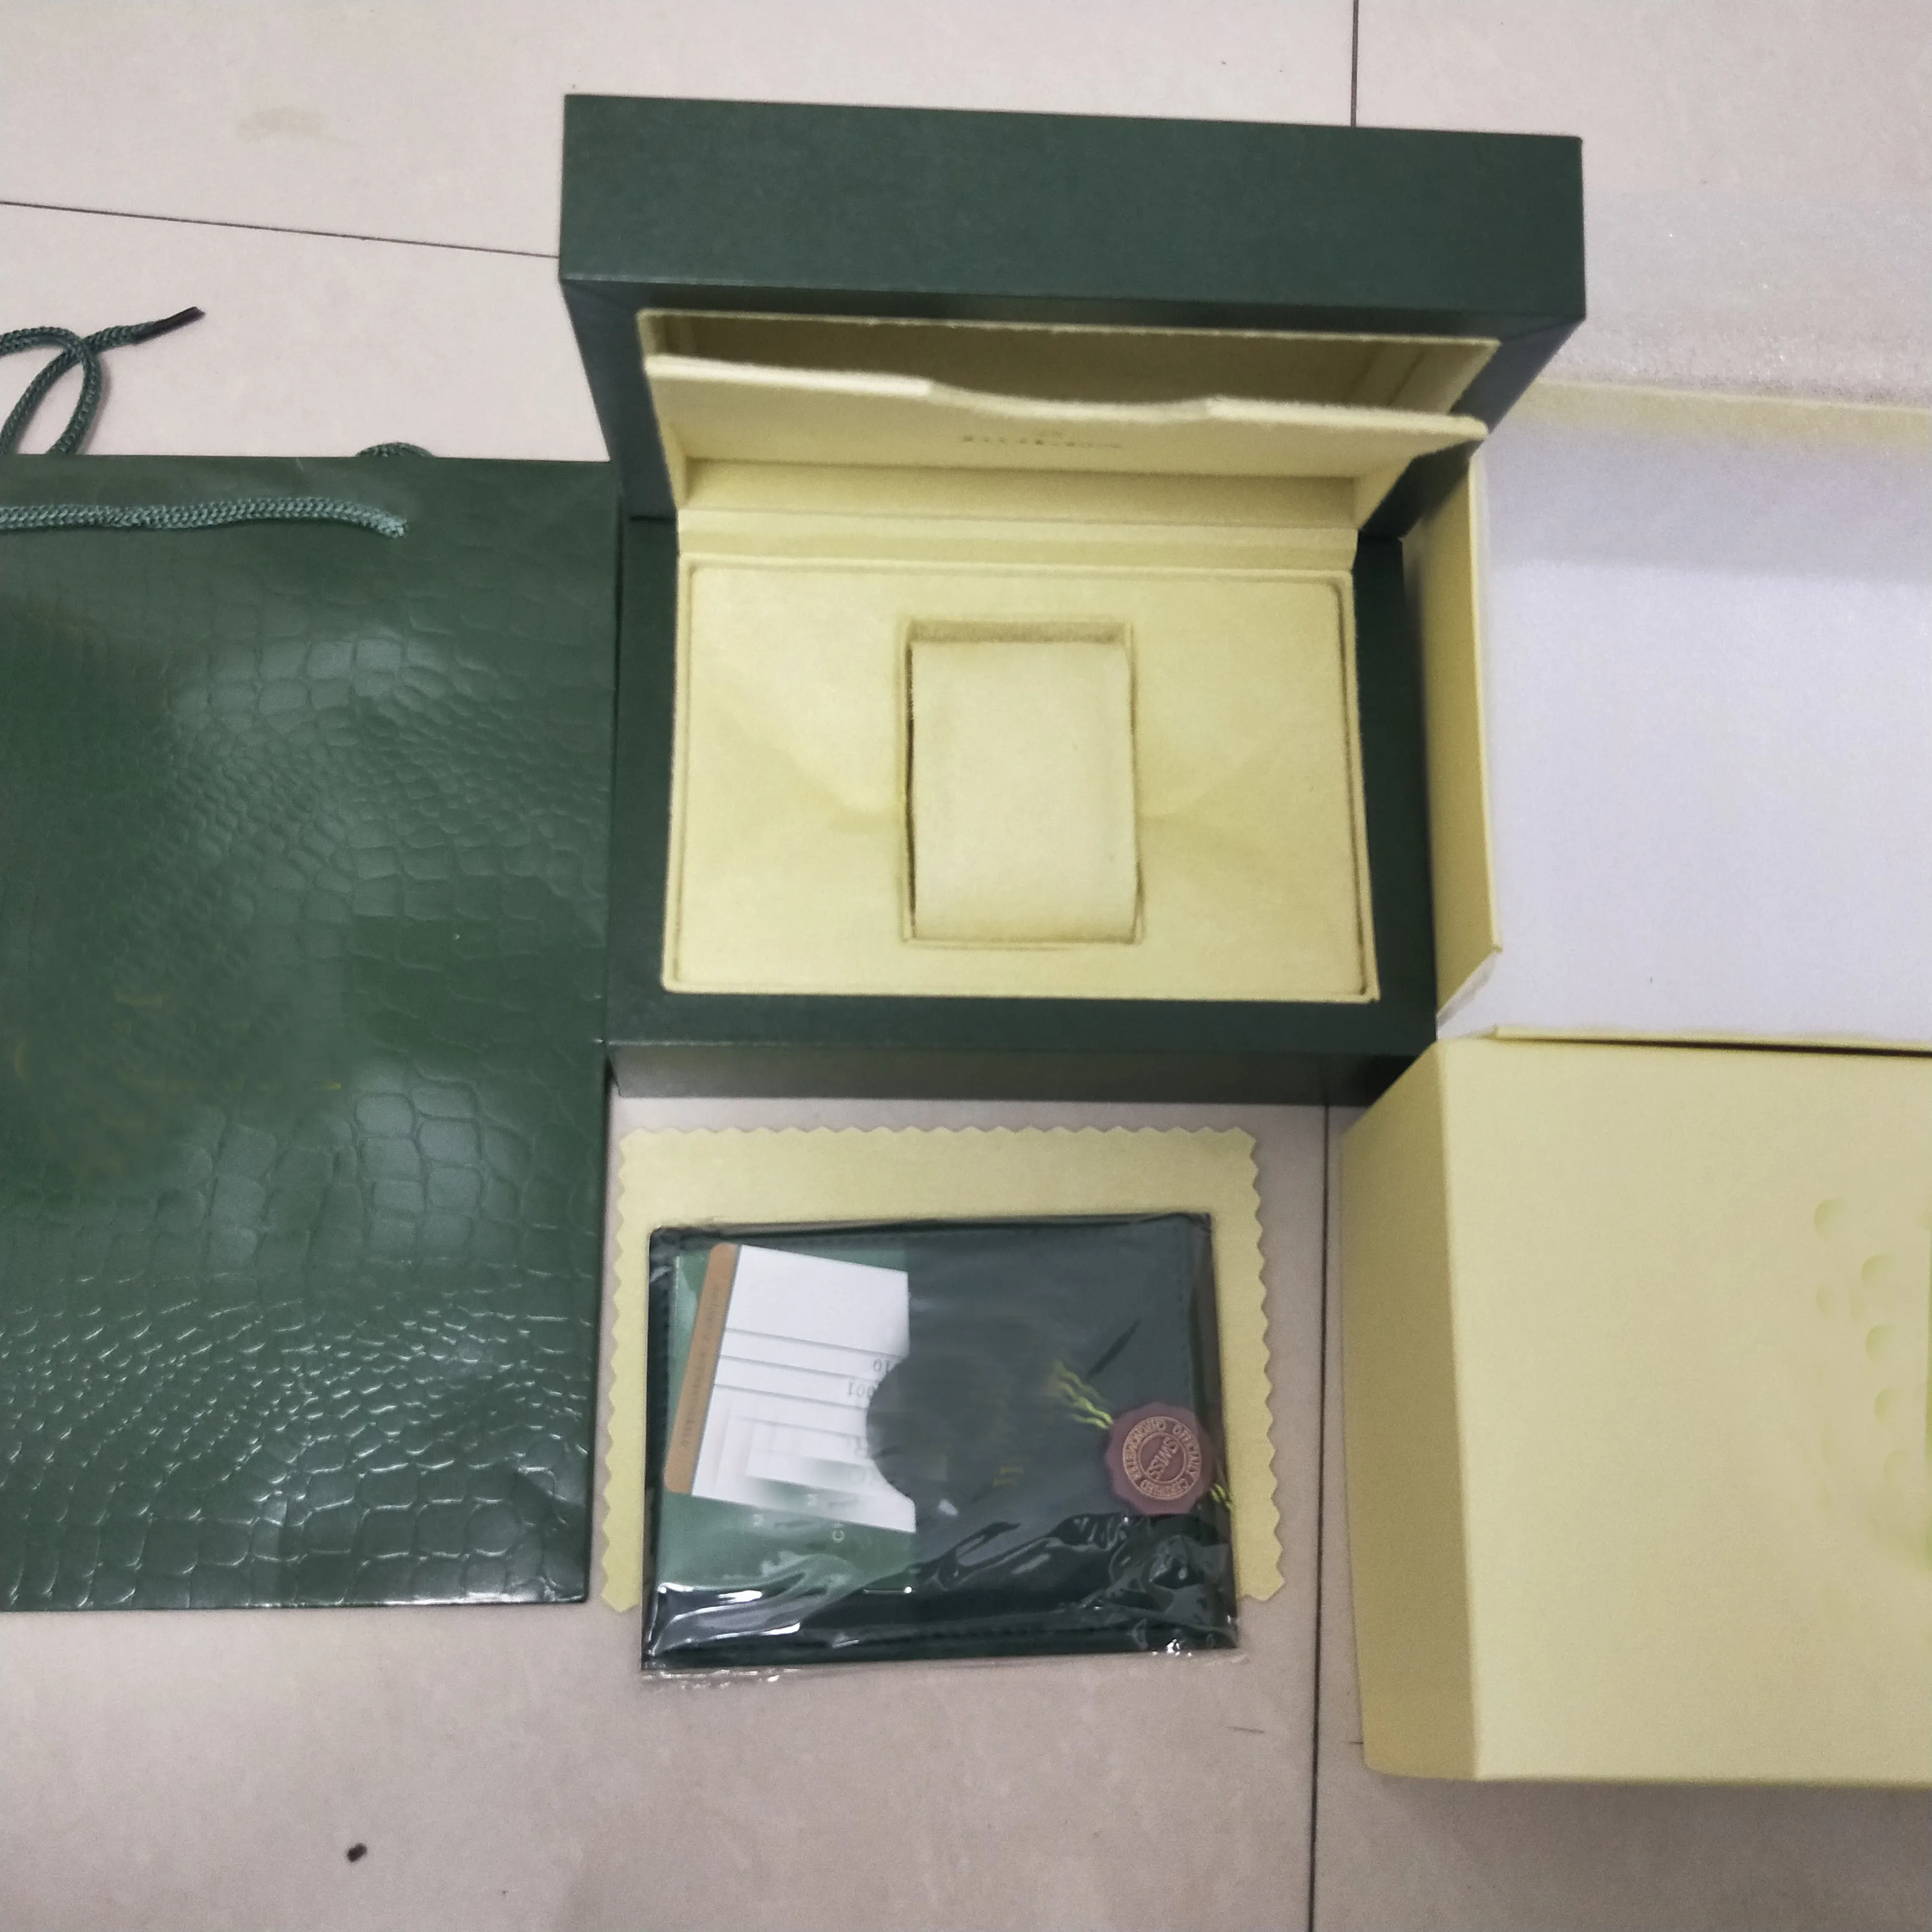 quality dark green watch box gift box 116610 228138 116234 126710 116718 326934 paper manual and document label in Swiss watc269r